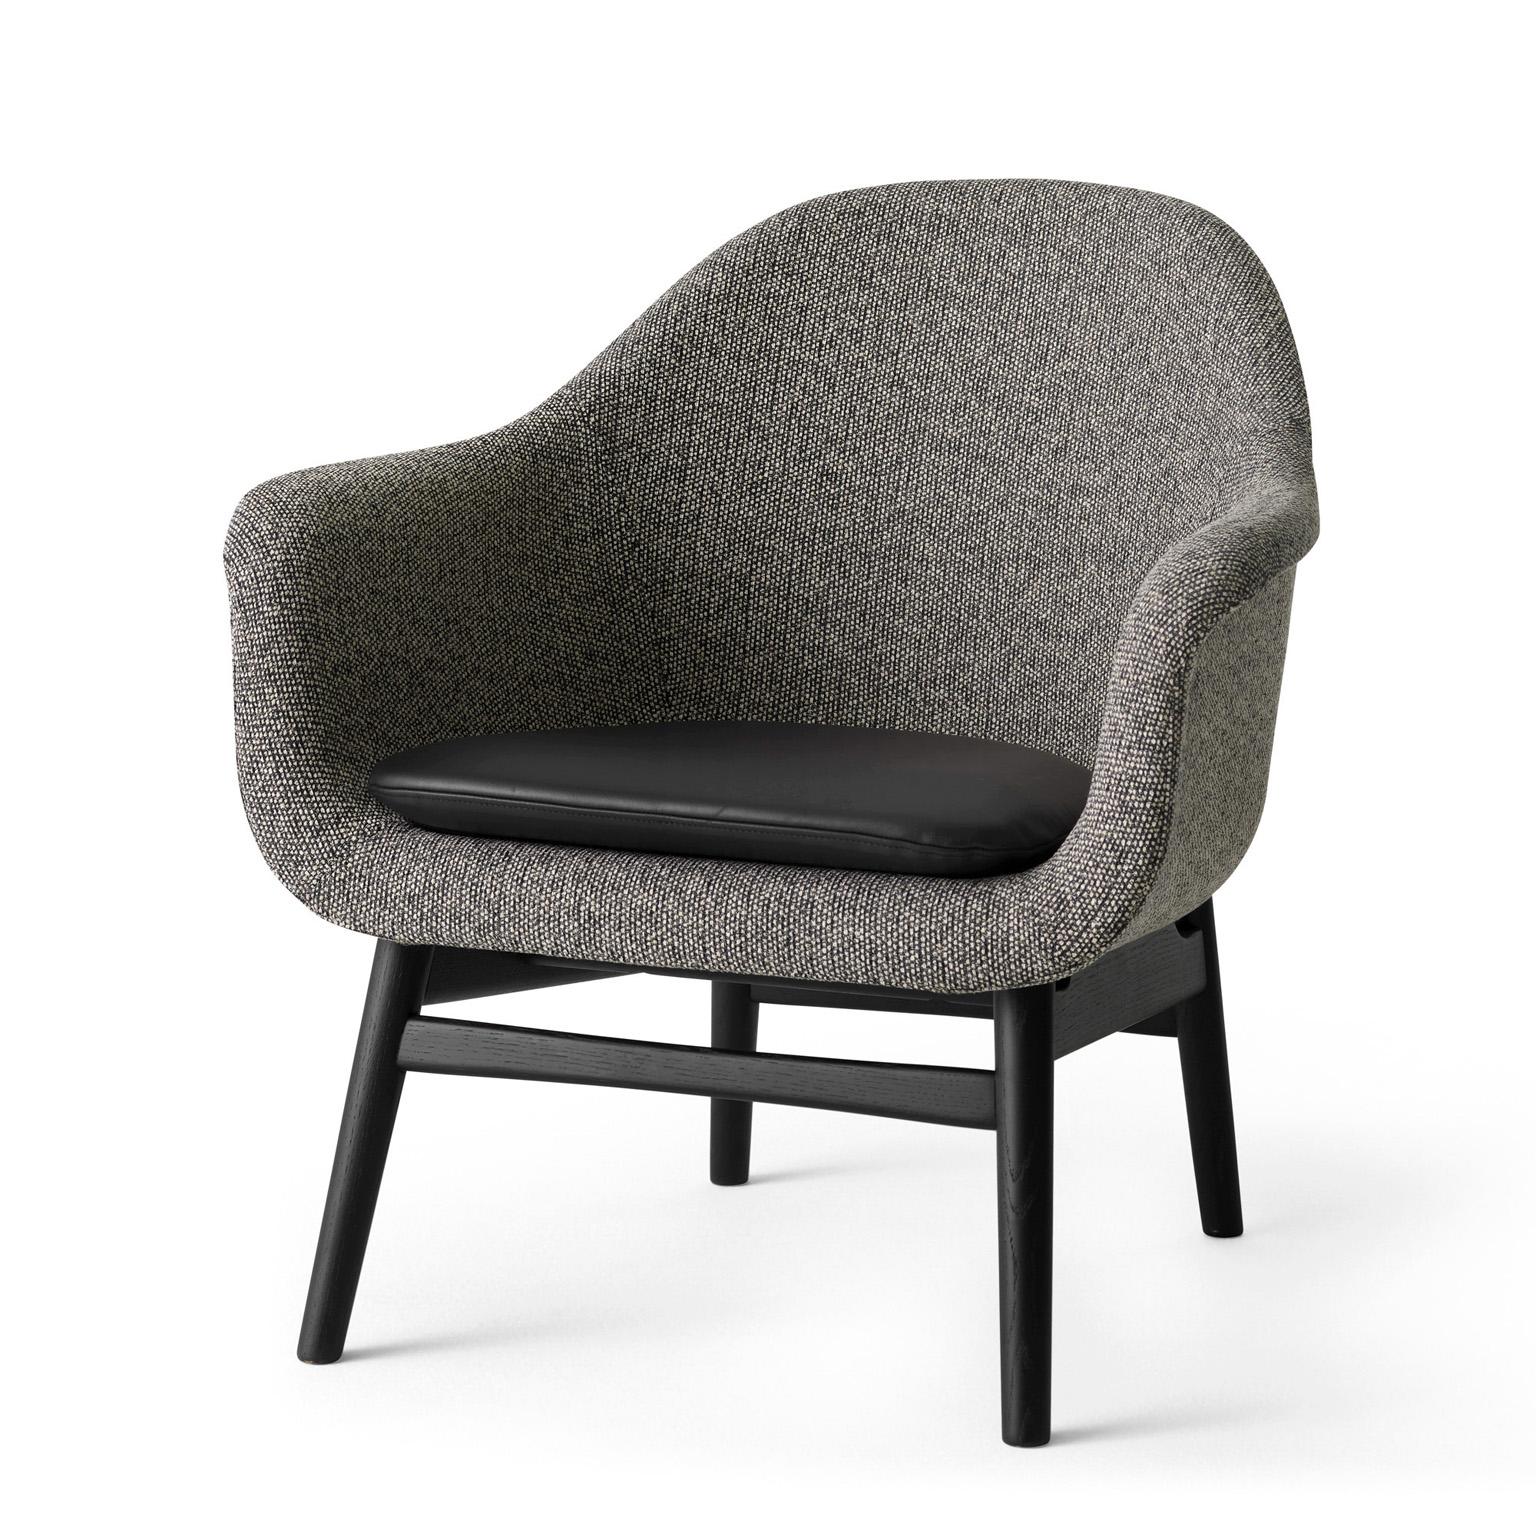 Already available in multiple iterations from a comfortable dining chair to a sophisticated swivel-base chair the Harbour collection gains a new member: the Harbour lounge chair. A sculptural piece with a Minimalist expression, the solid yet